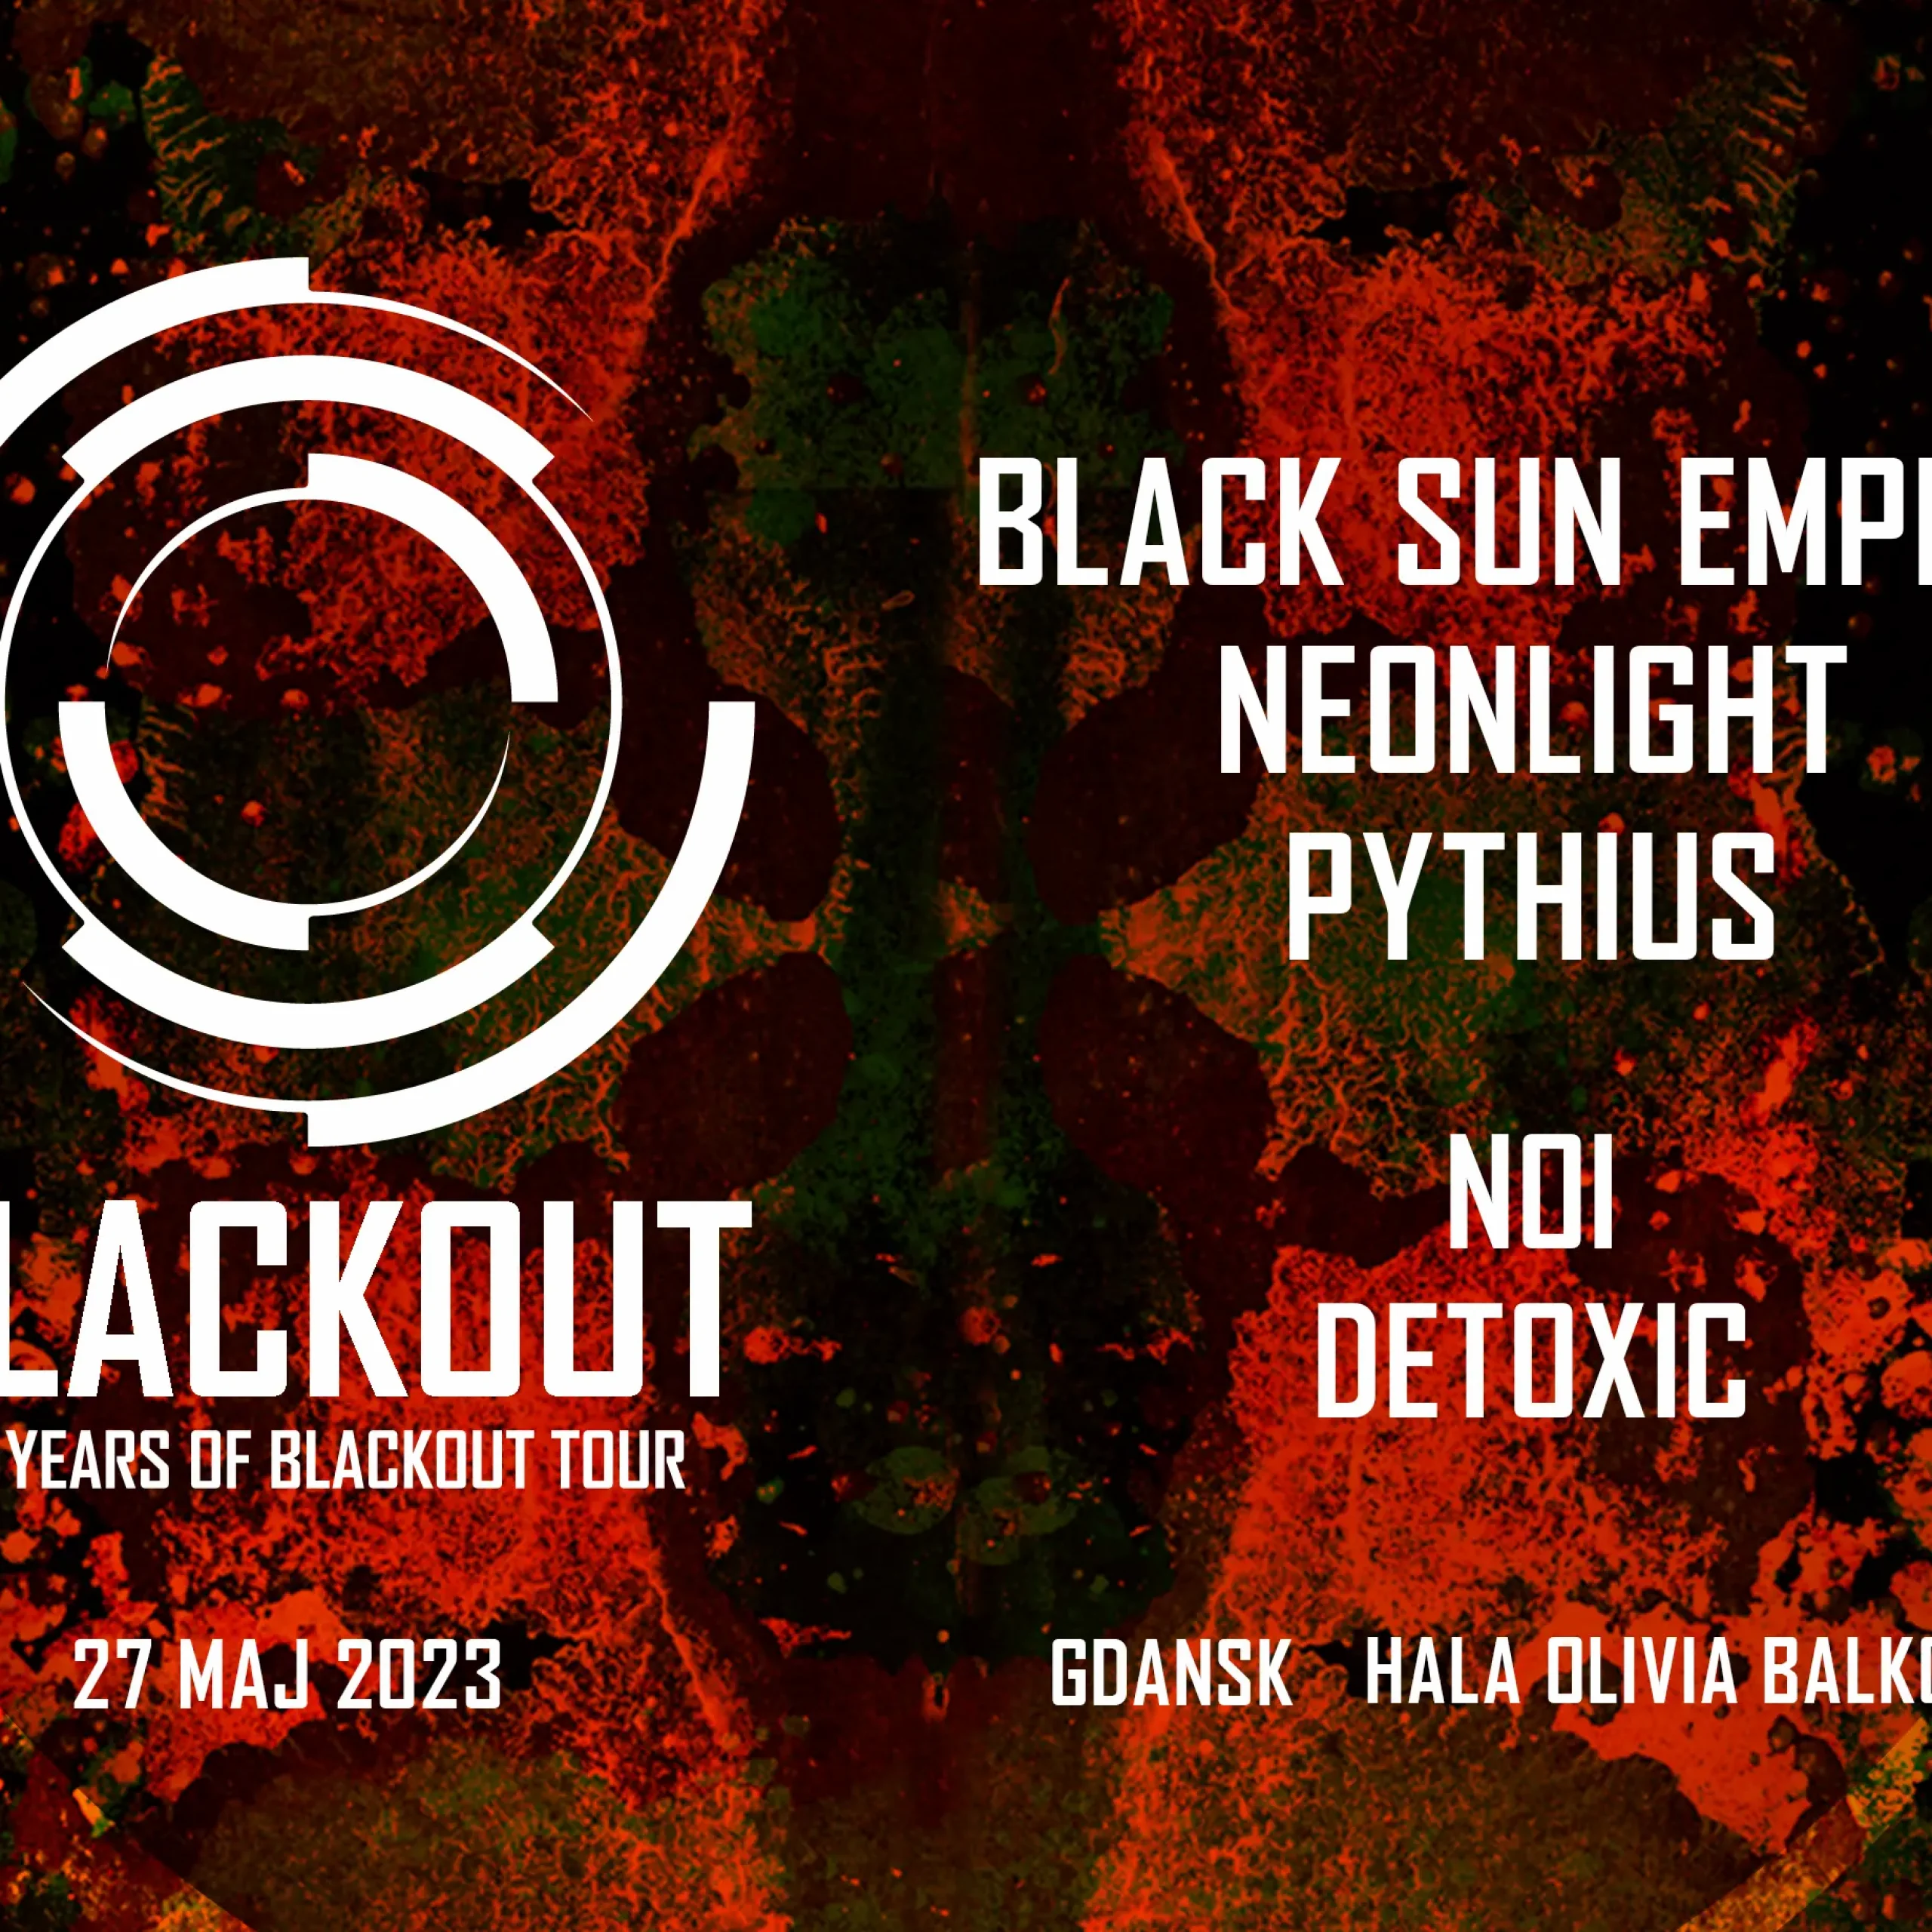 BLACKOUT 20 YEARS * BSE * NEONLIGHT * PYTHIUS I GDAŃSK